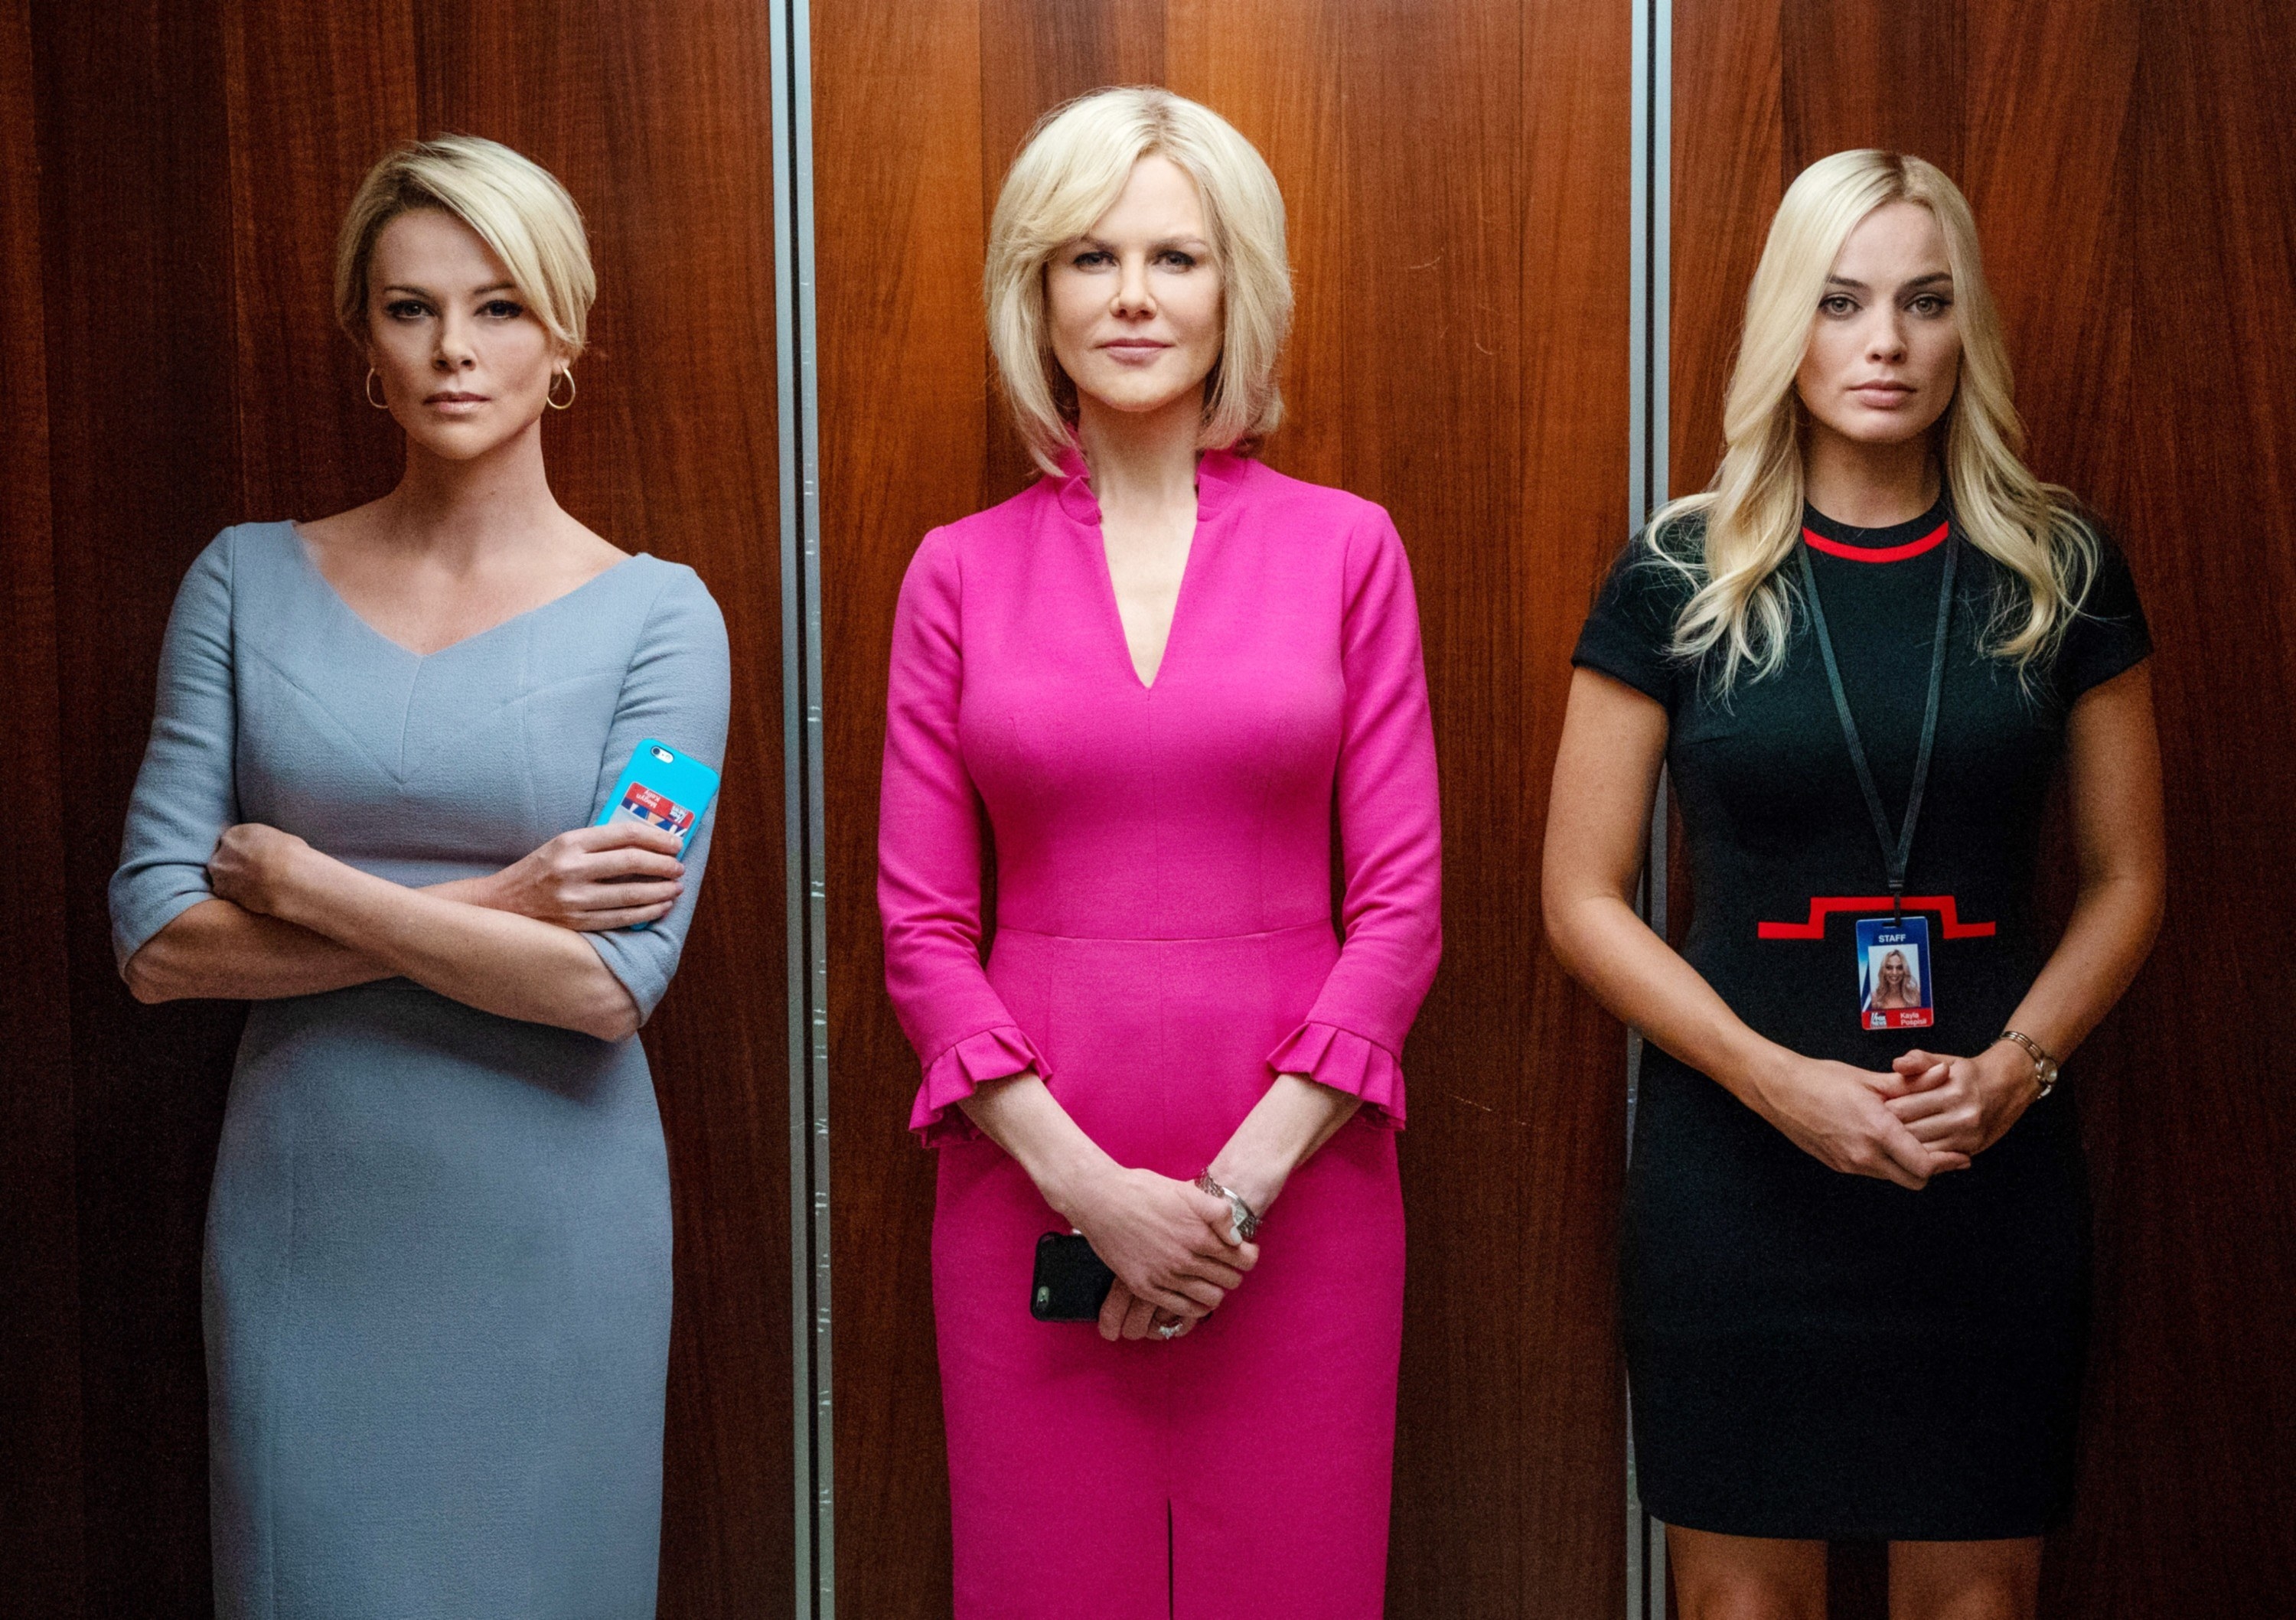 Charlize Theron, Nicole Kidman, and Margot Robbie in the elevator